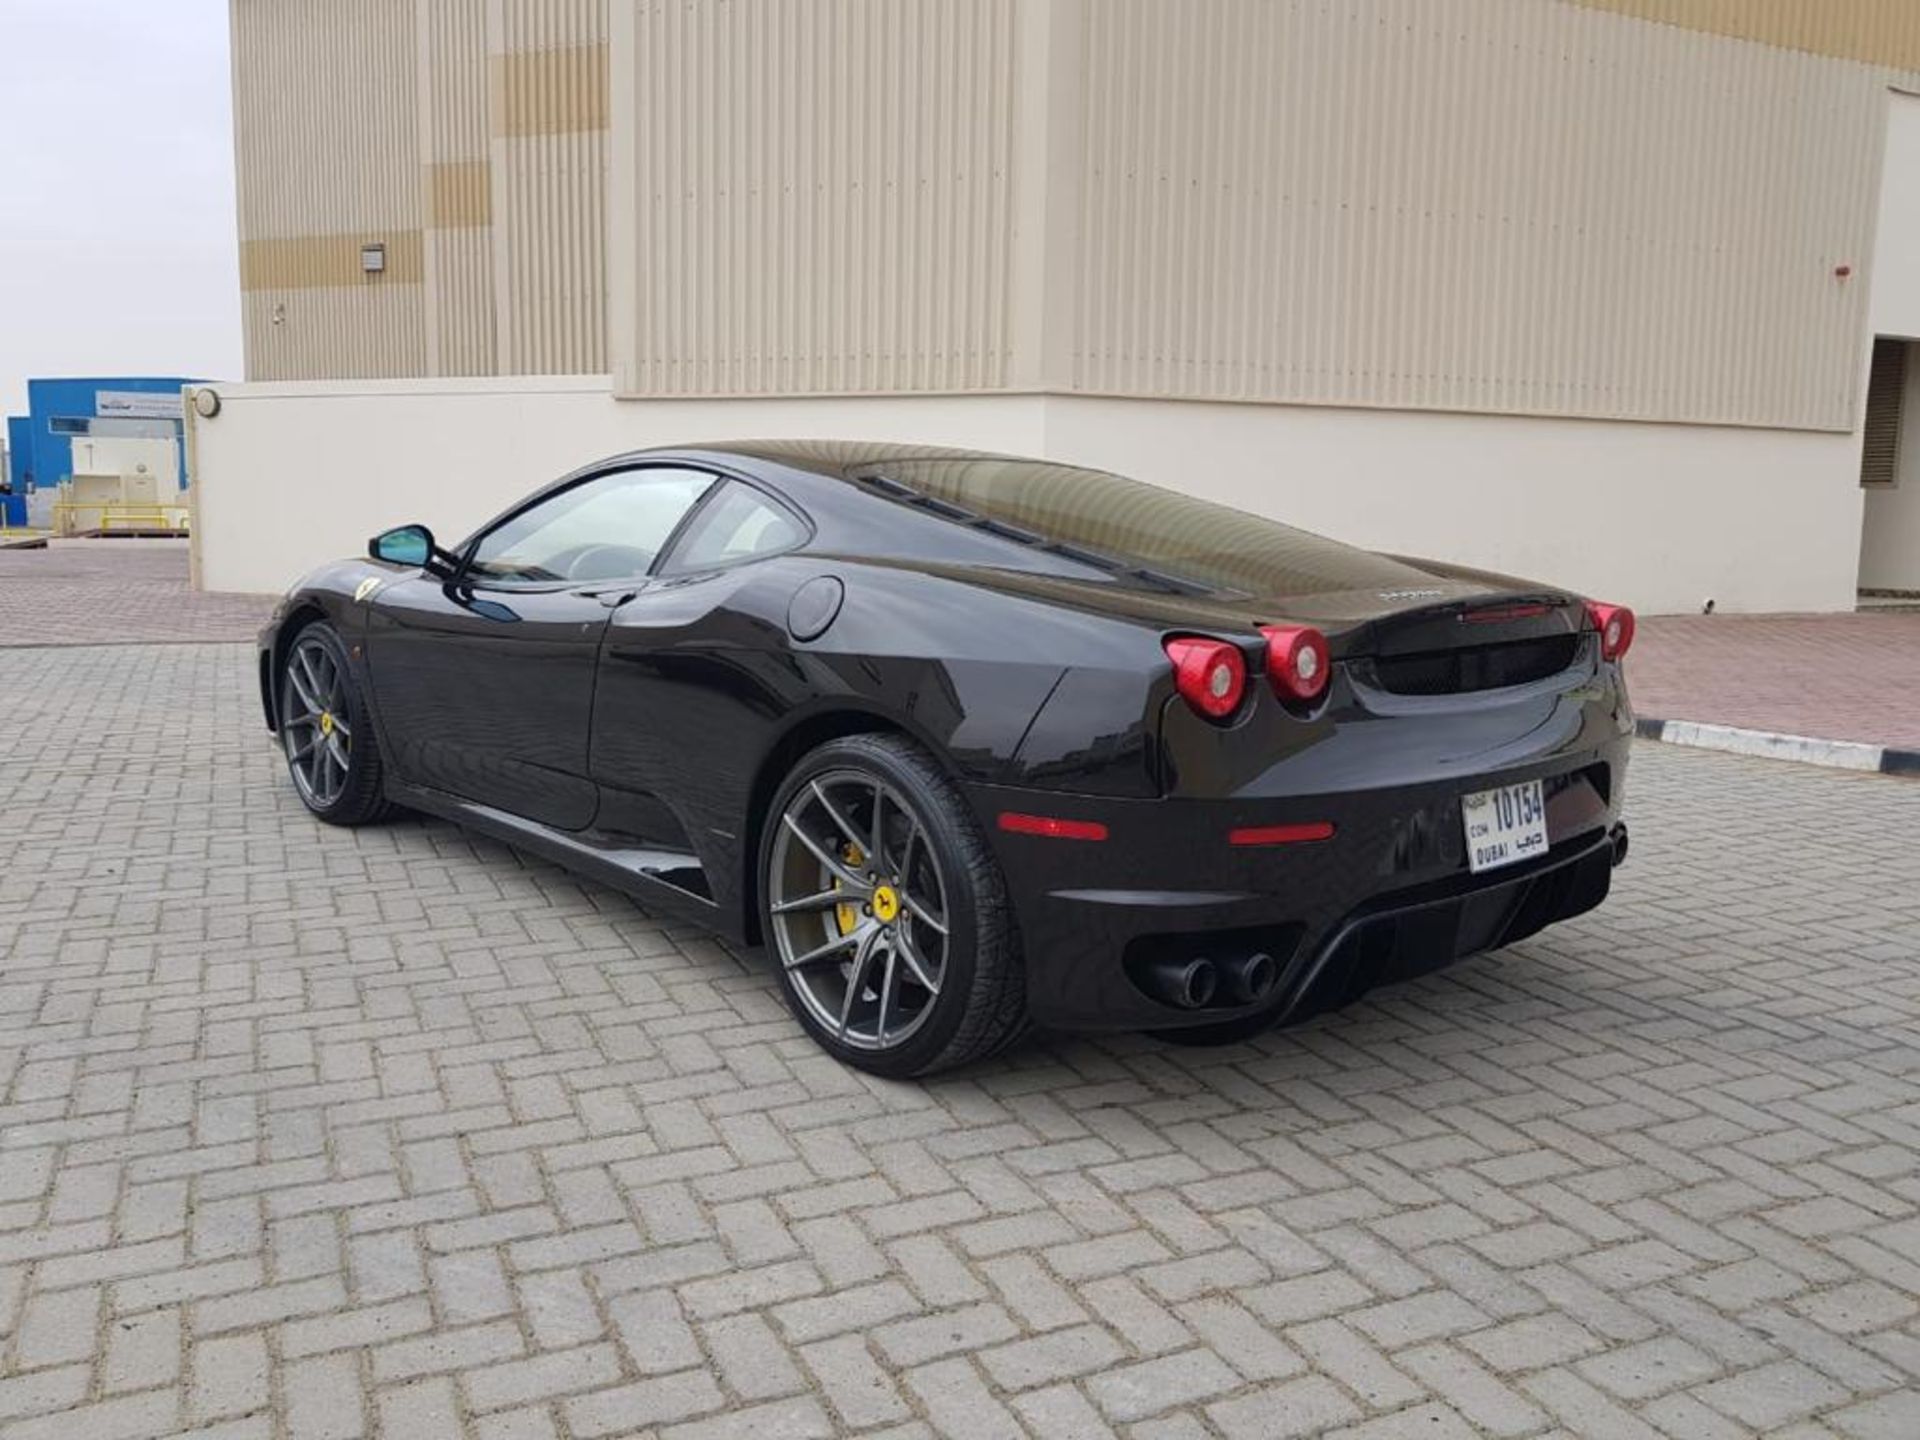 2007 FERRARI F430 BLACK 2 DOOR COUPE 4.3L AUTOMATIC LHD, PERFECT CONDITION INSIDE AND OUT - Image 6 of 13